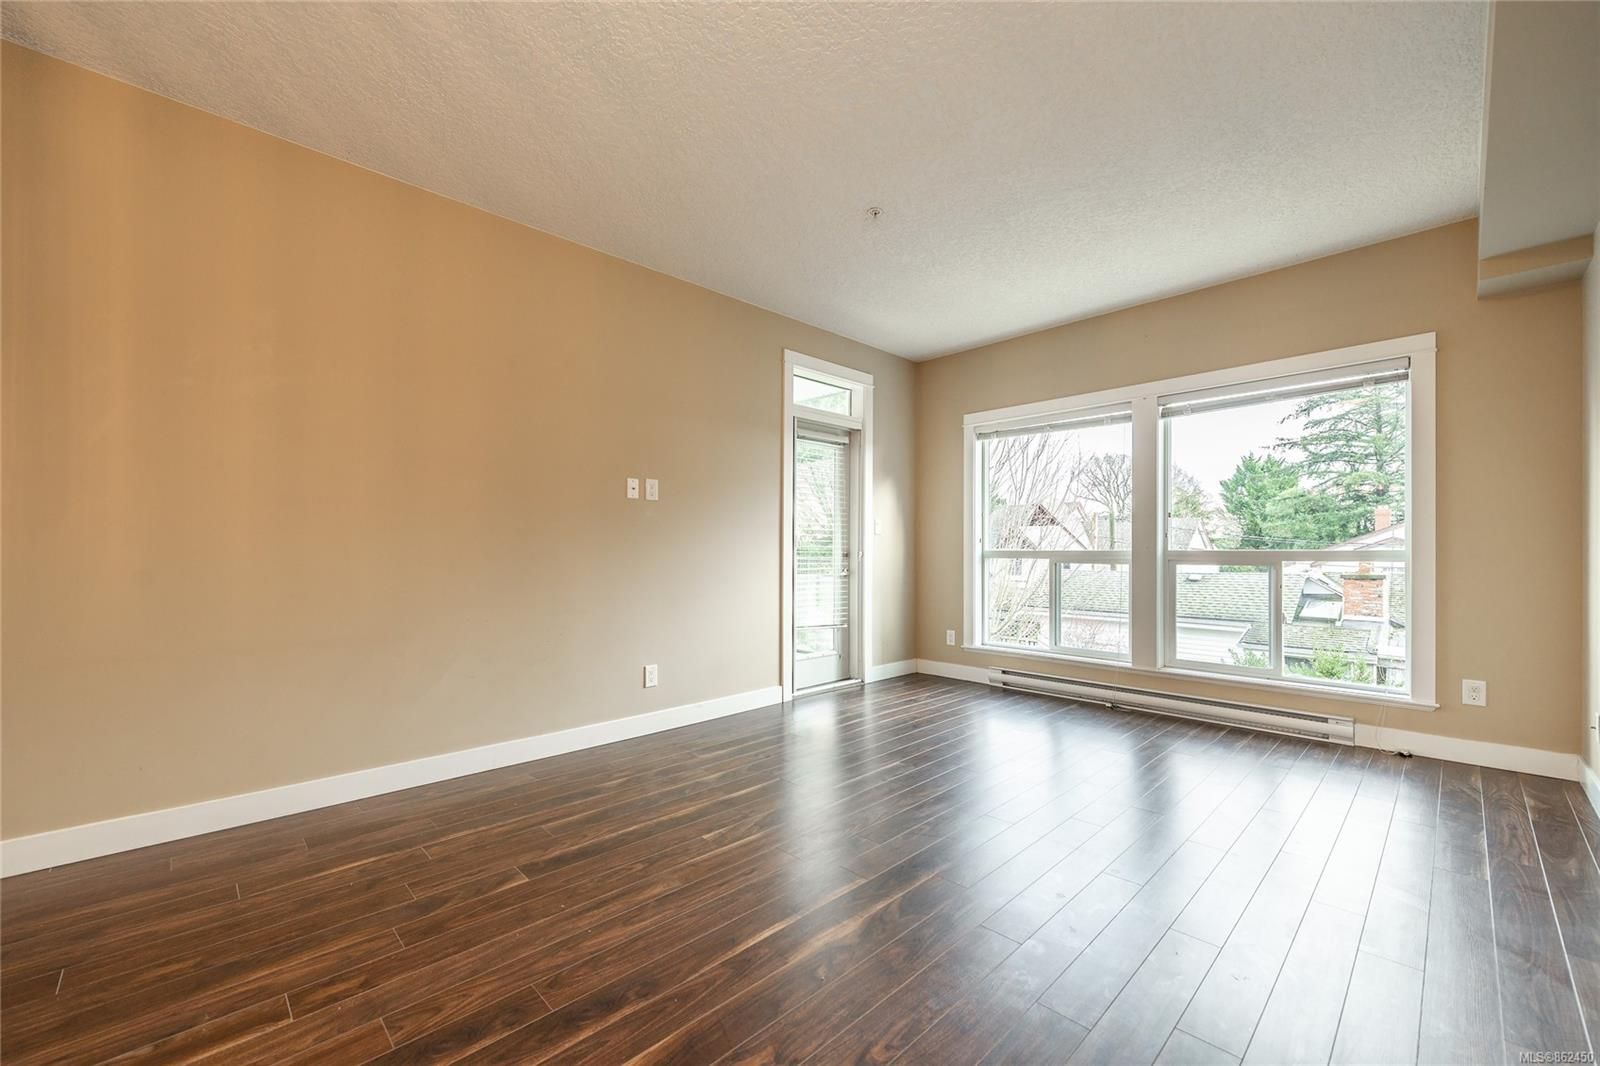 Photo 3: Photos: 204 938 Dunford Ave in Langford: La Langford Proper Condo for sale : MLS®# 862450